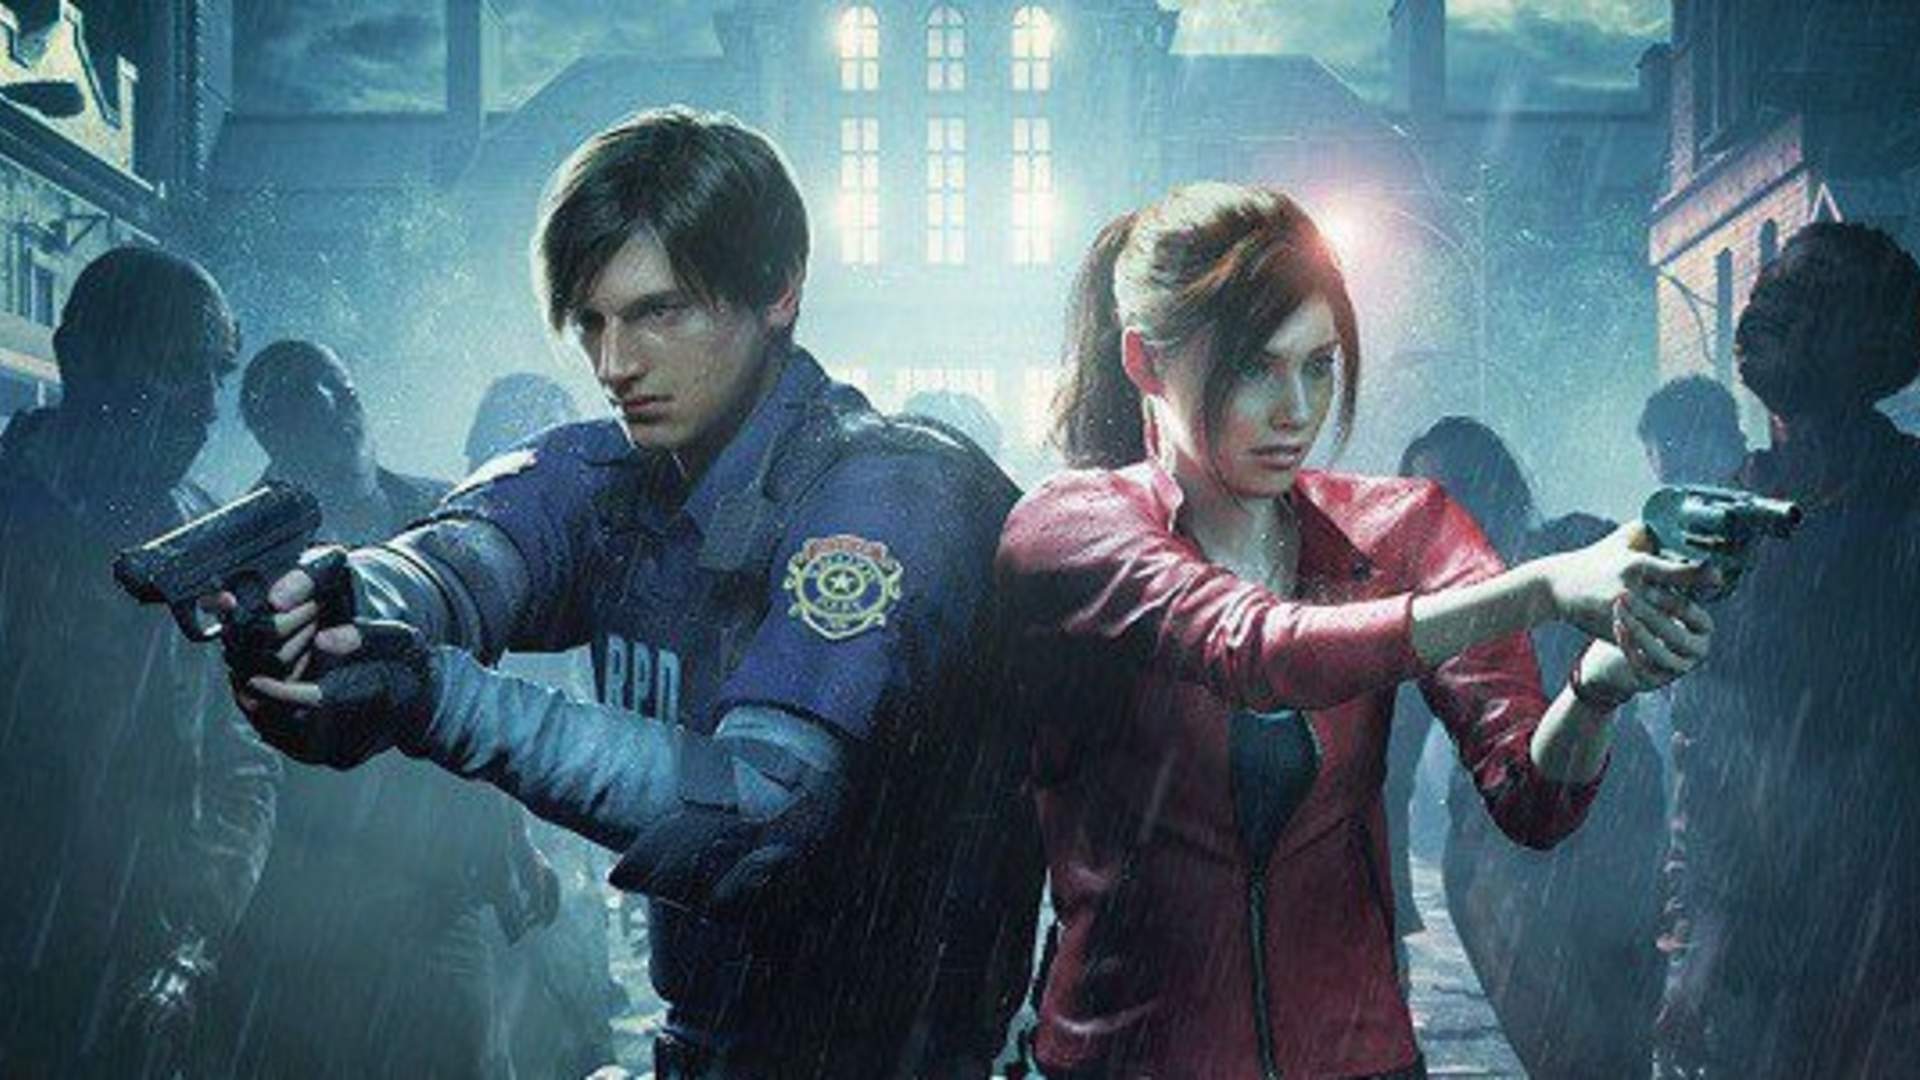 Resident Evil 2 Walkthrough Guides for Leon and Claire's Campaigns